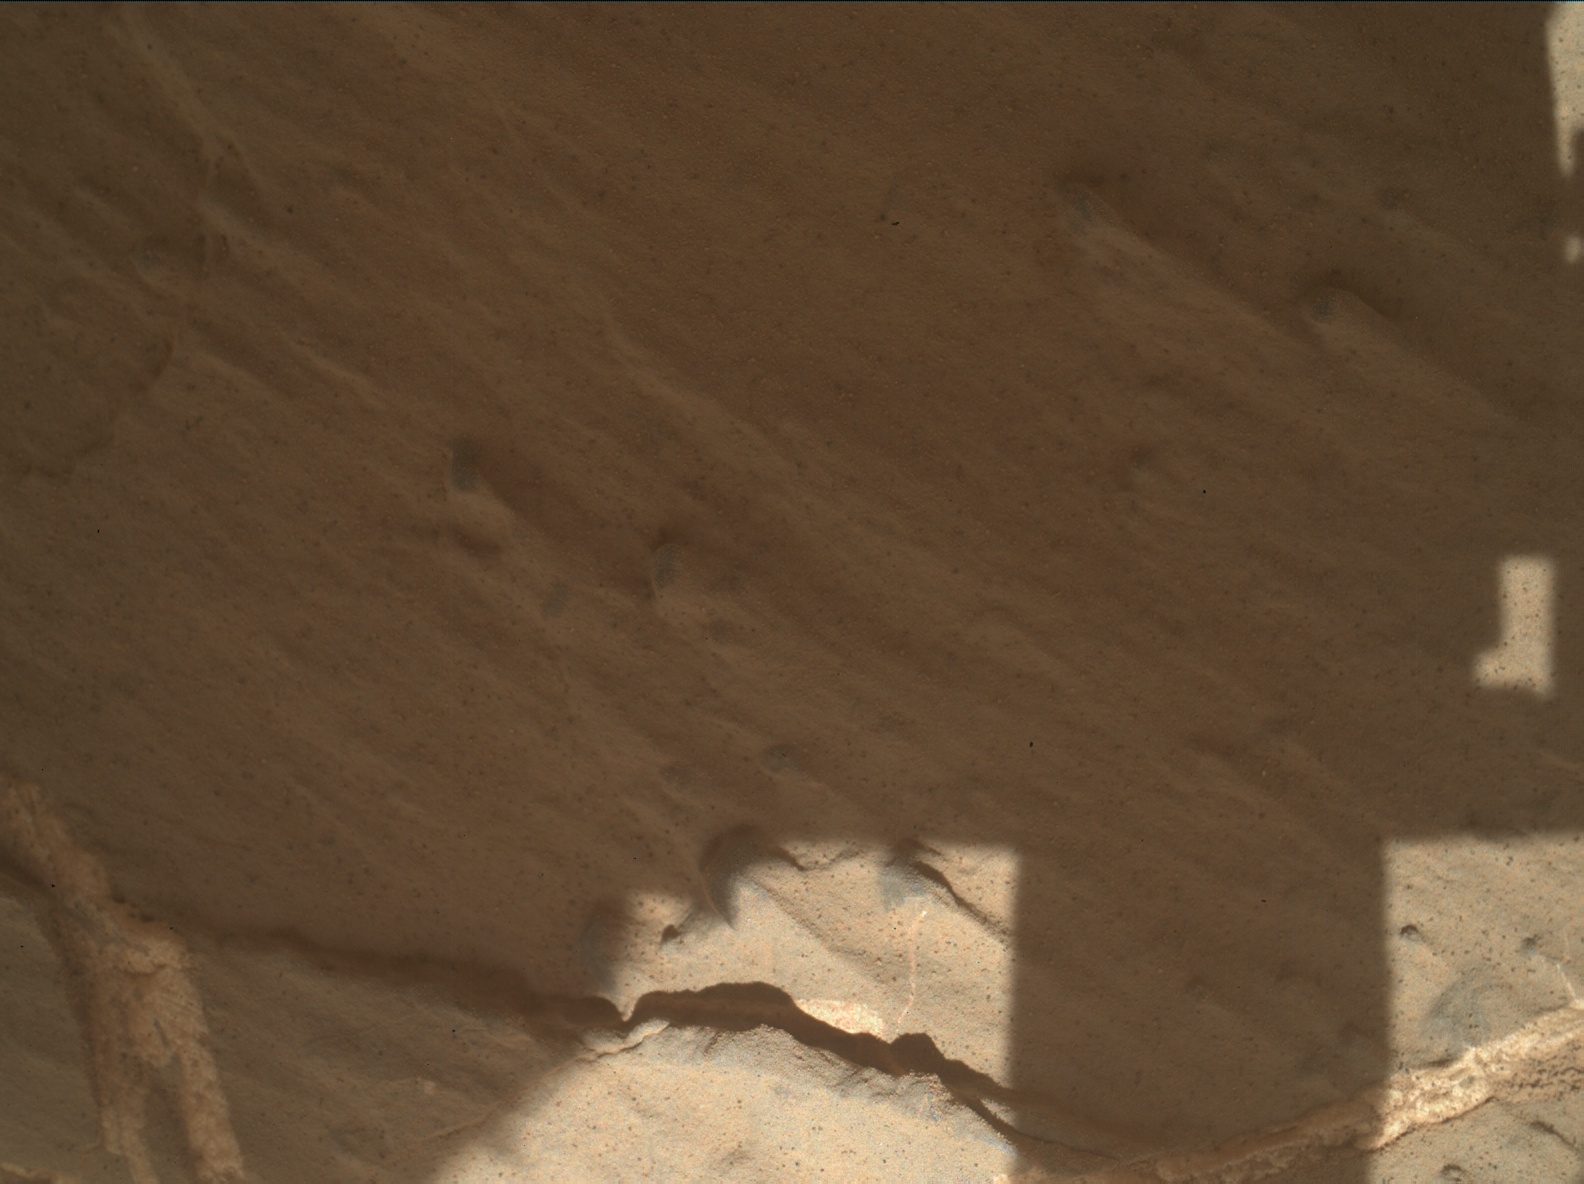 Nasa's Mars rover Curiosity acquired this image using its Mars Hand Lens Imager (MAHLI) on Sol 2613